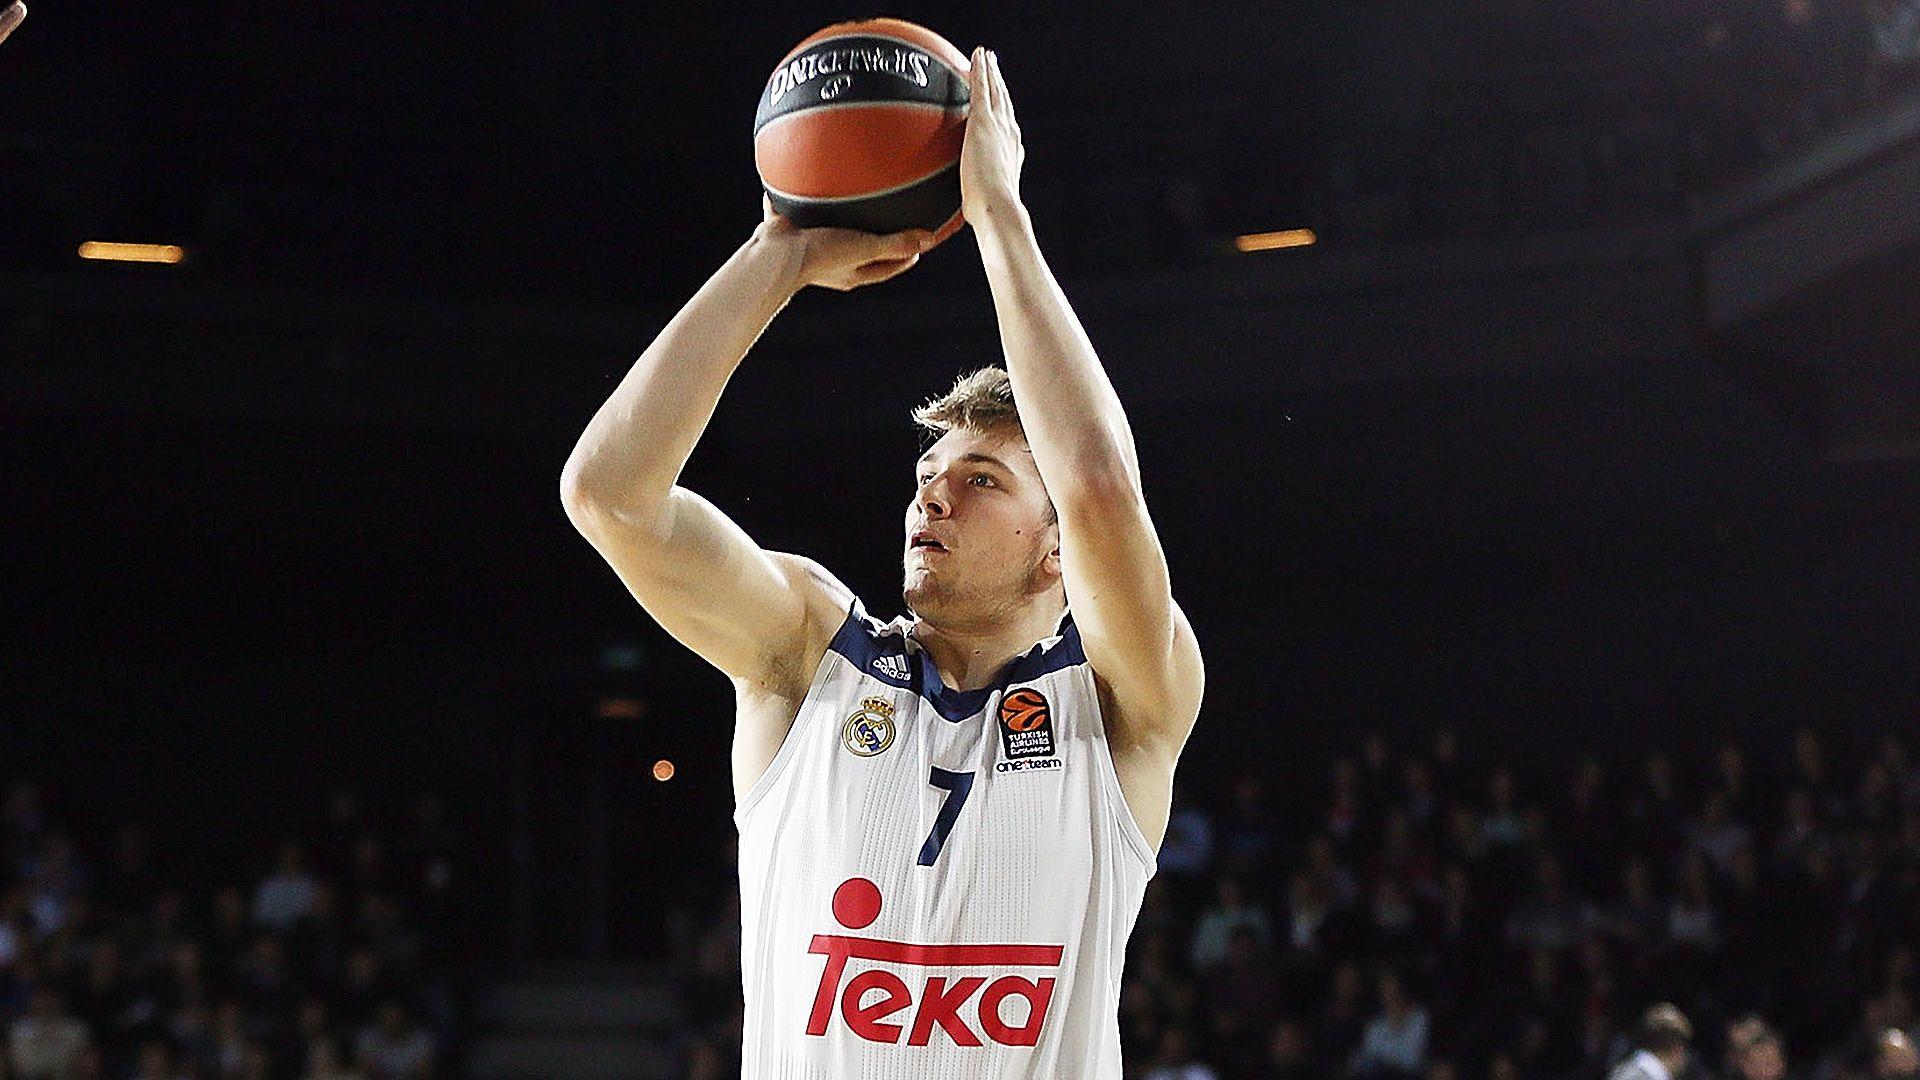 Luka Doncic can't commit yet to 2018 NBA Draft